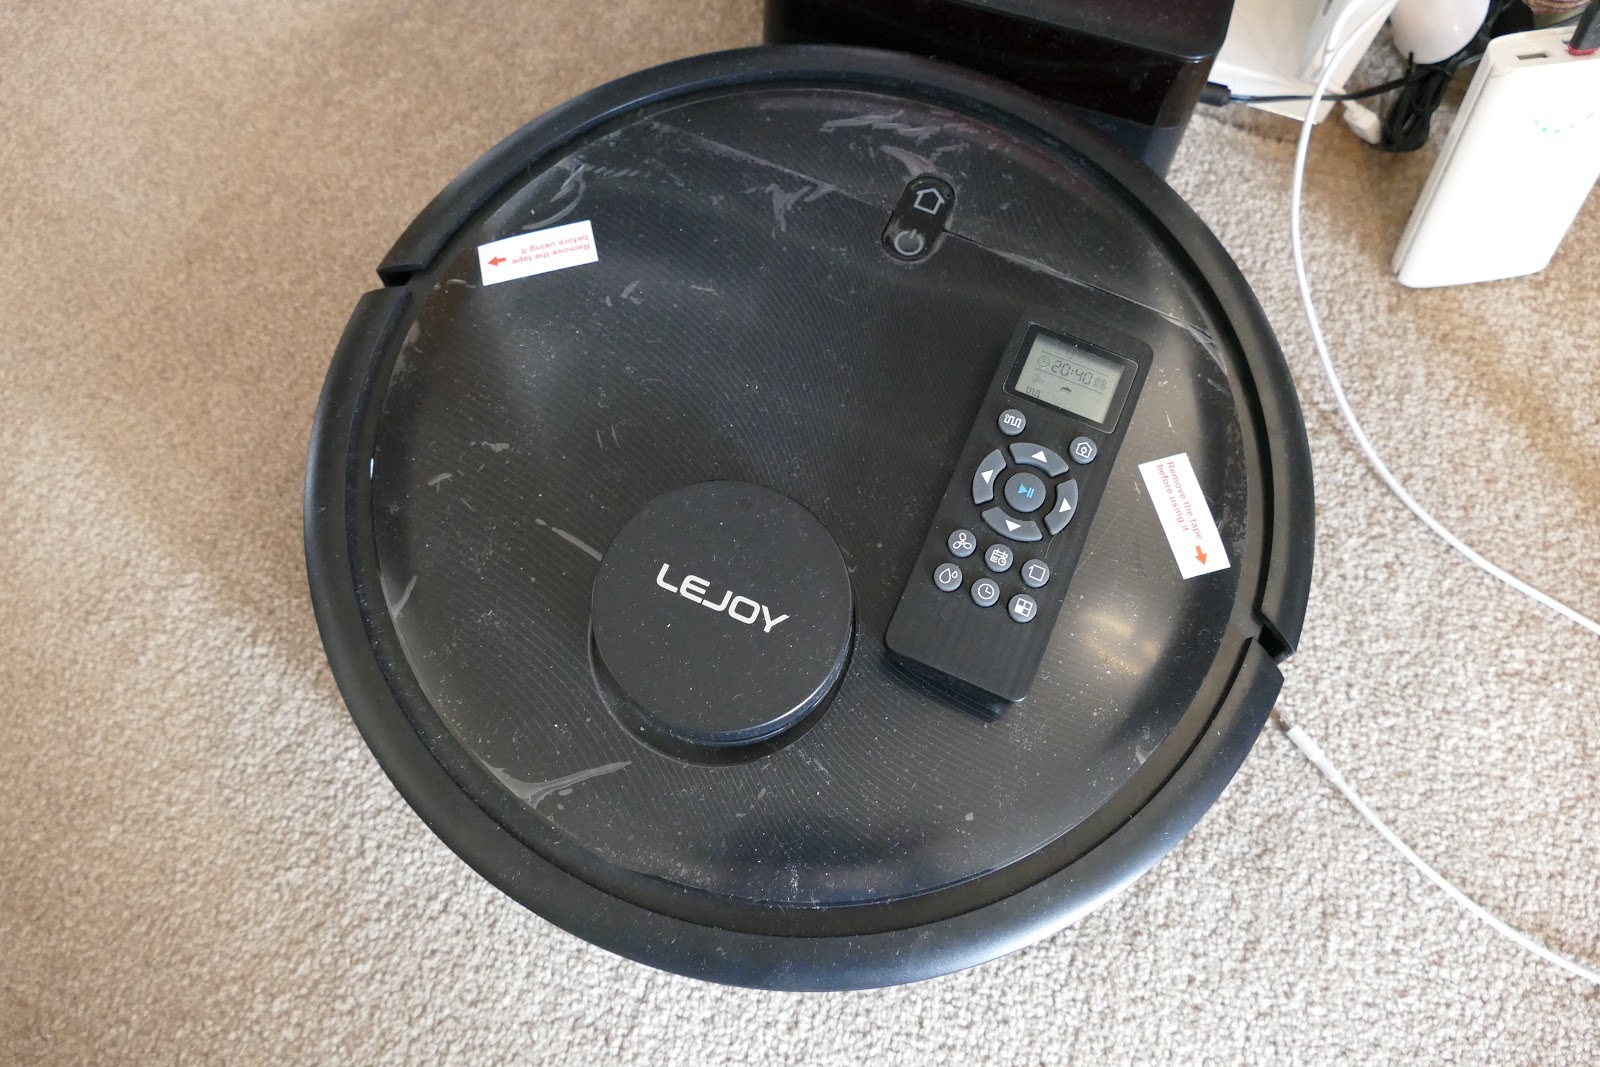 How I Save Time Using The LeJoy Robot Vacuum Cleaner- A Review 